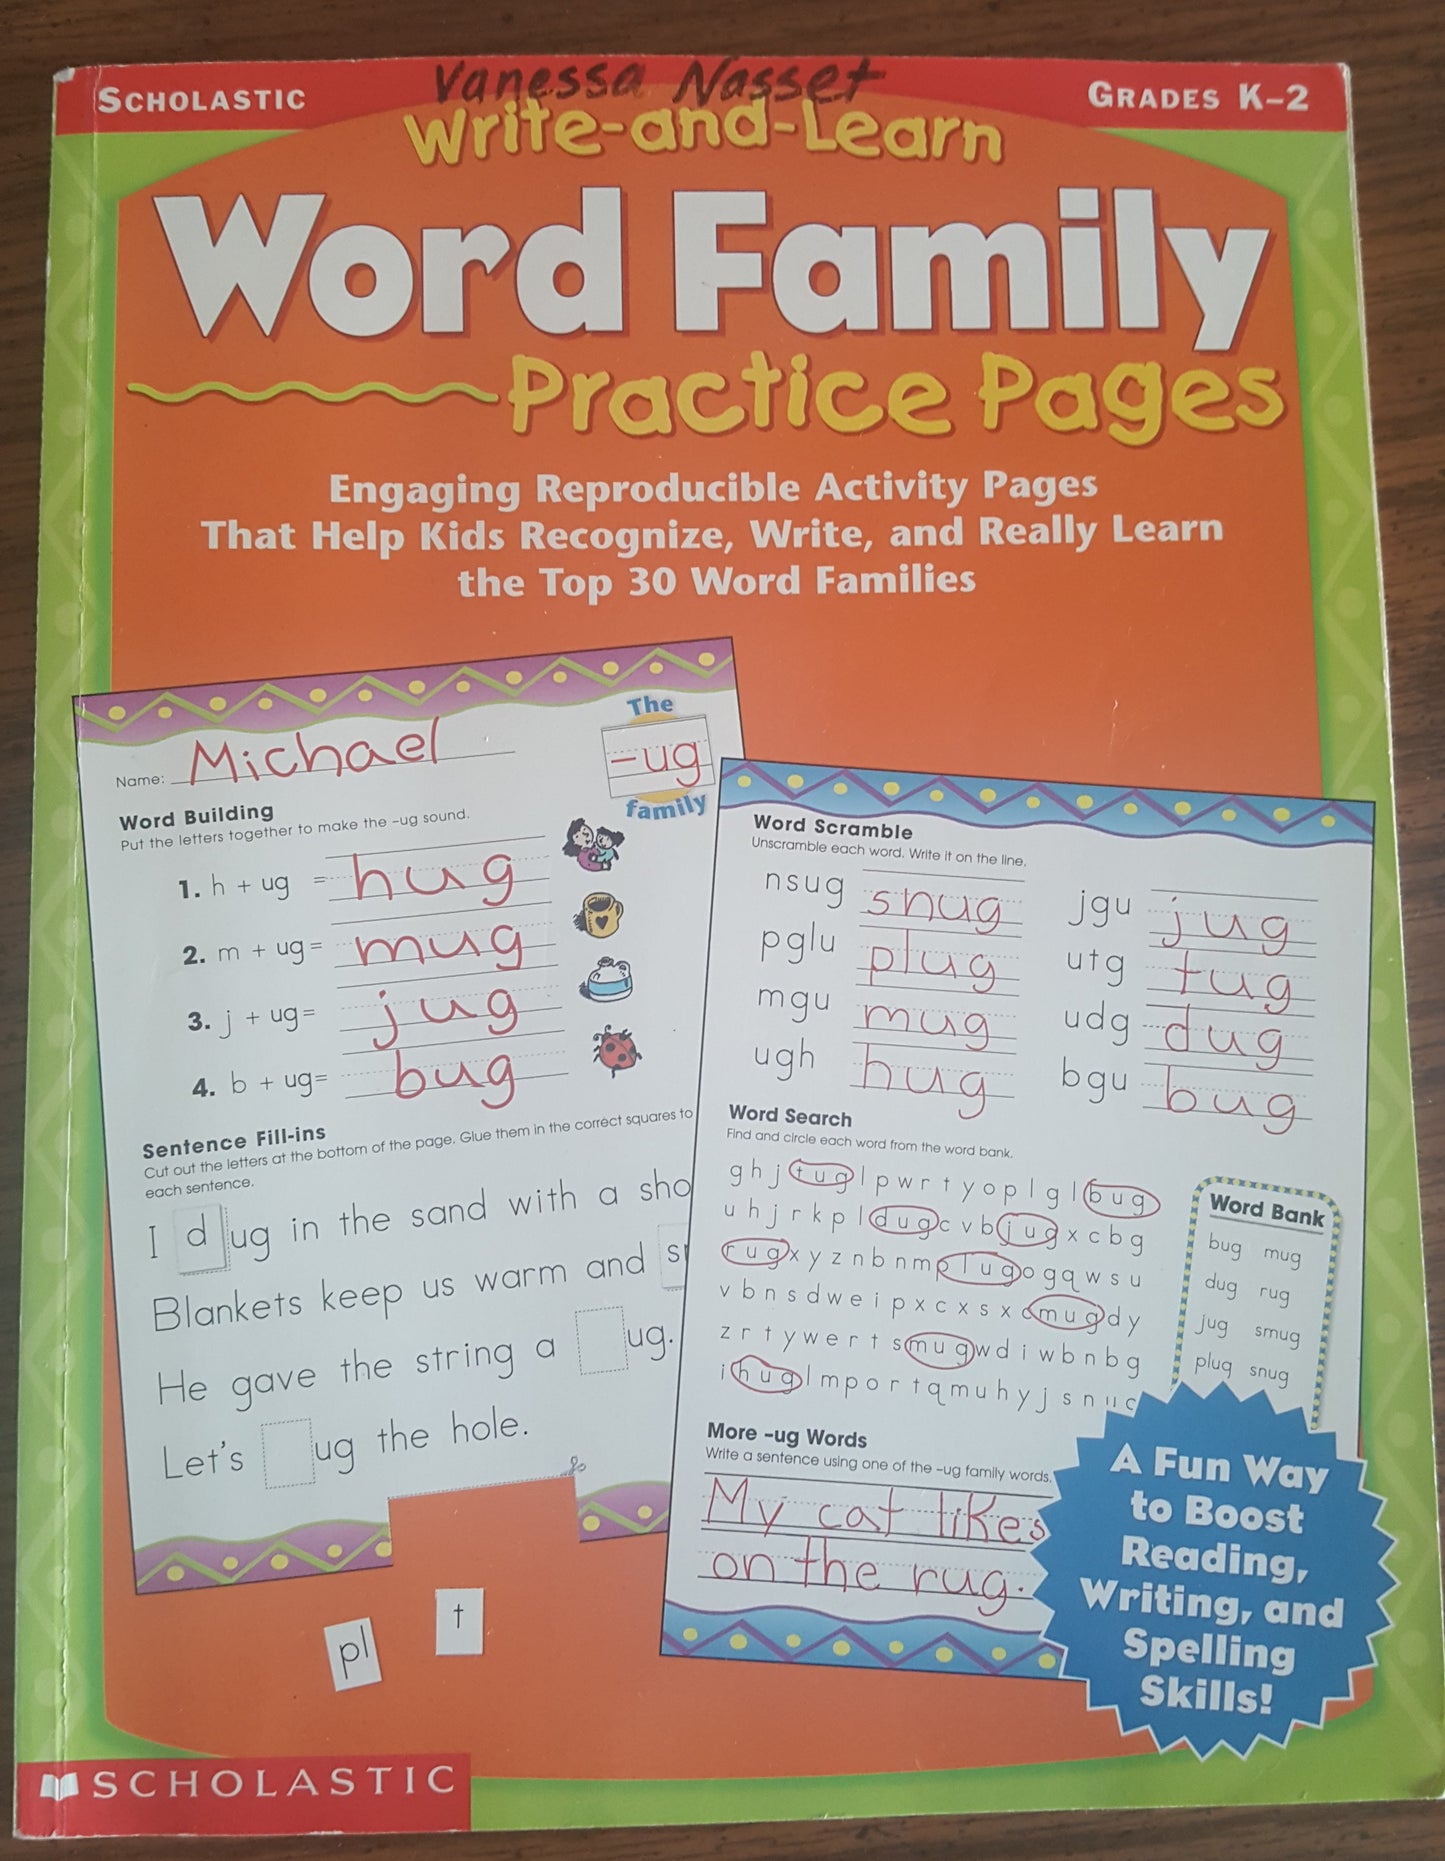 Word Family Practice Pages K - 2